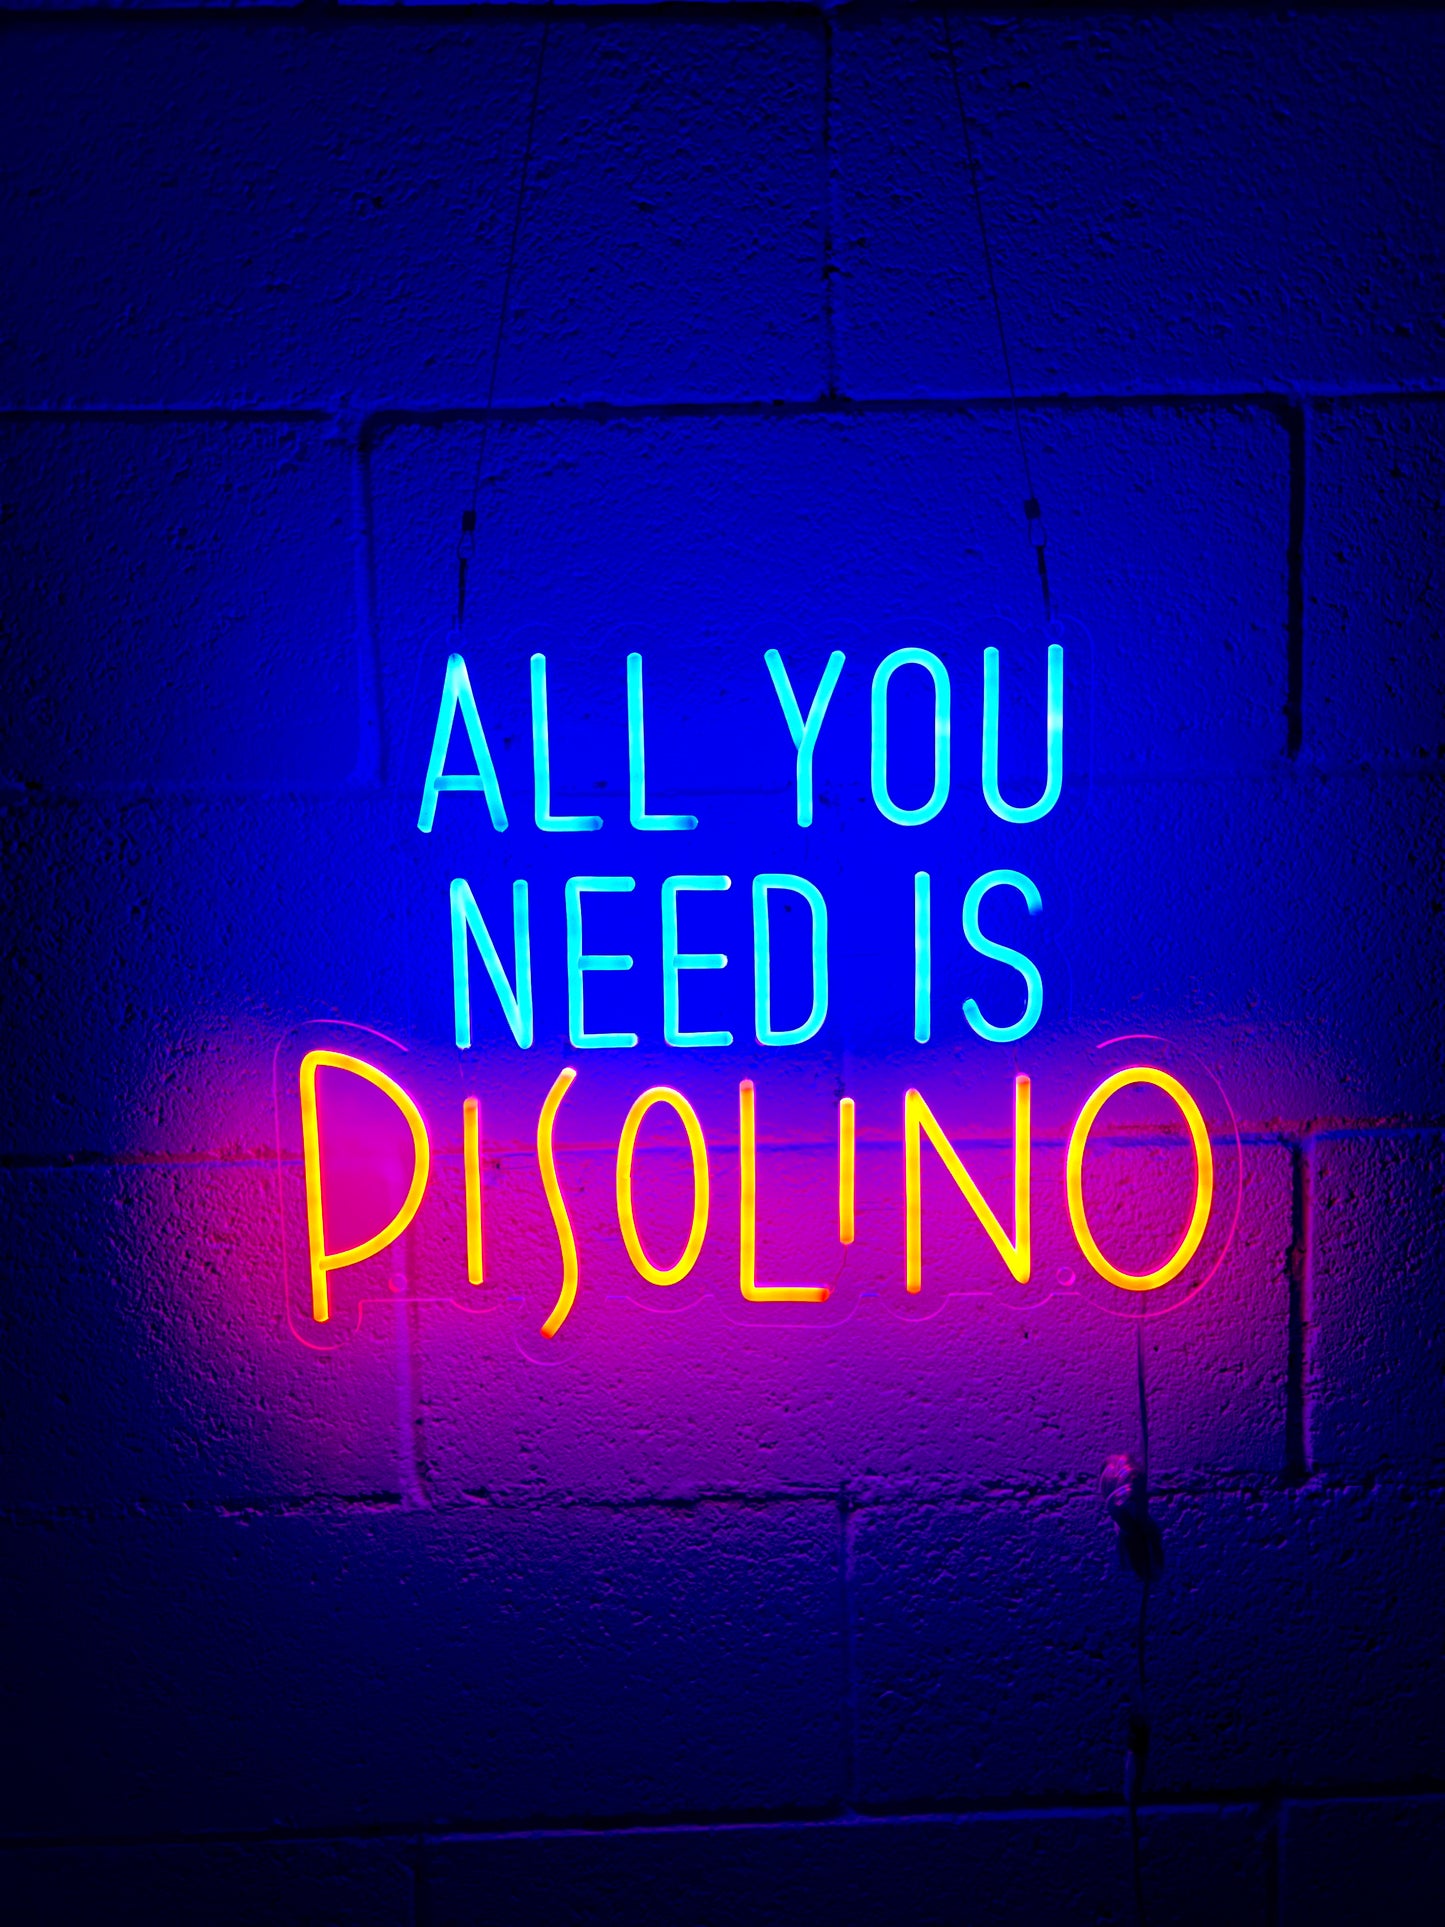 ALL YOU NEED IS PISOLINO